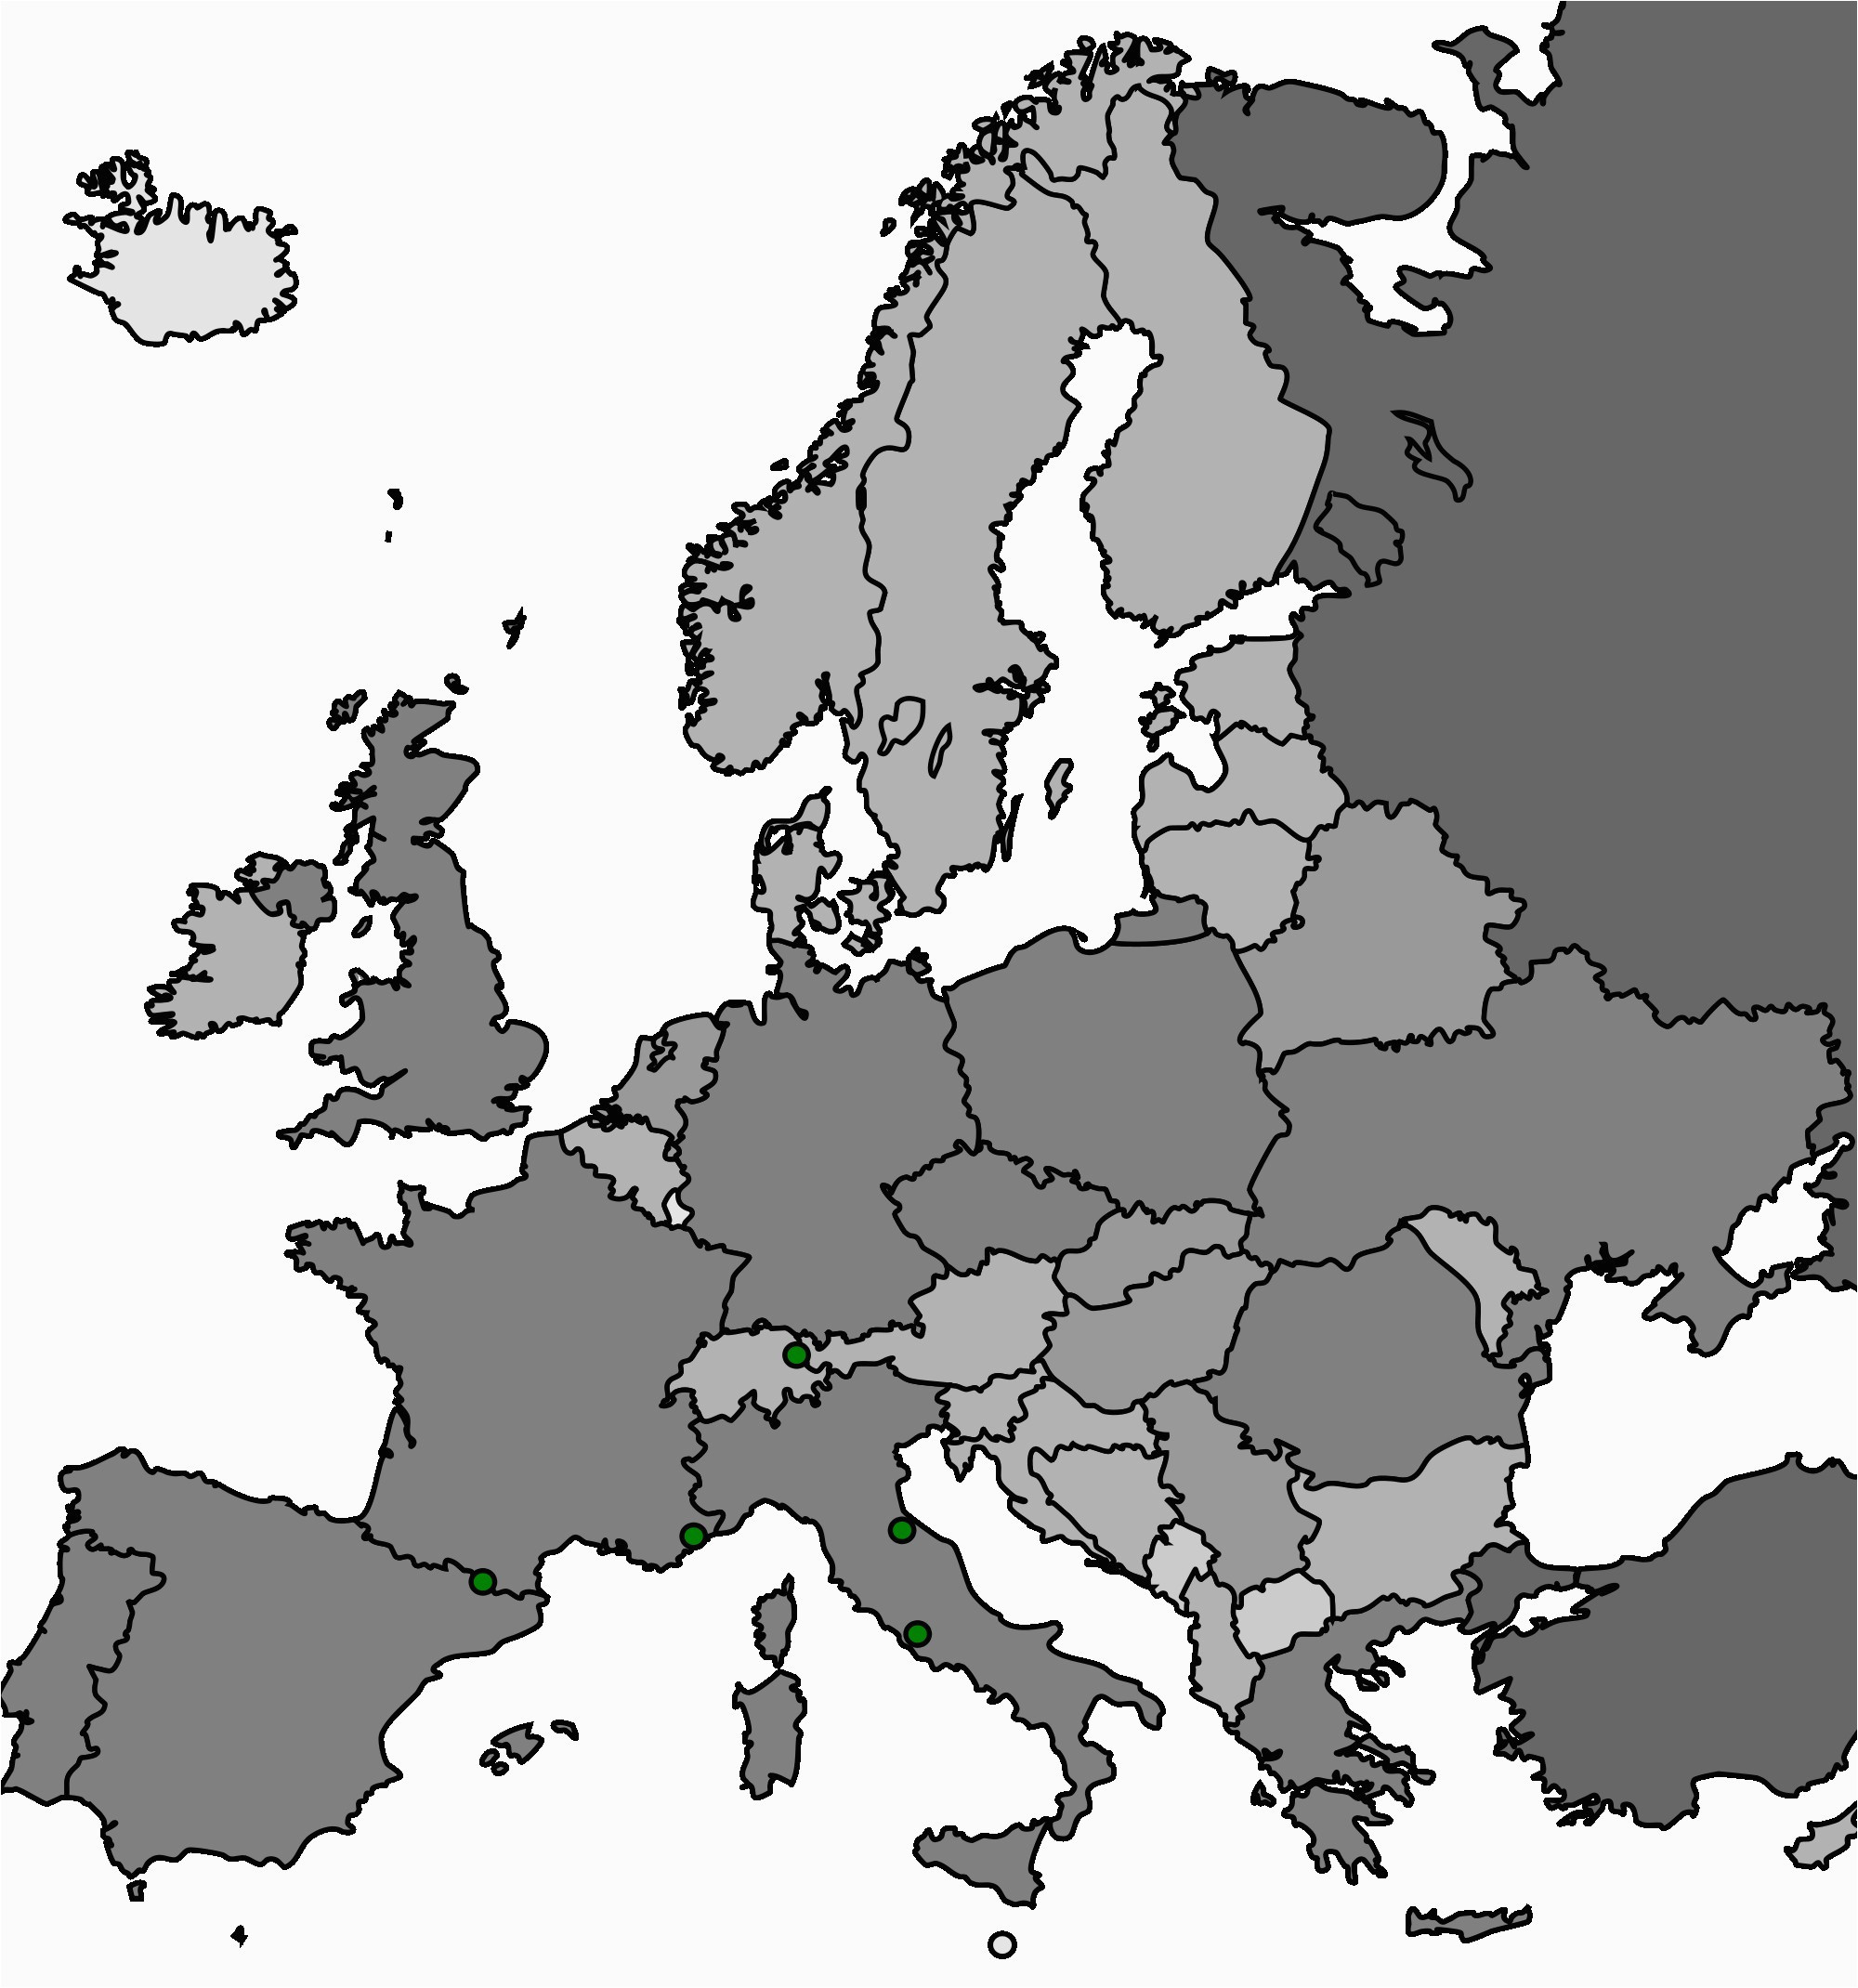 map-of-europe-without-labels-53-strict-map-europe-no-names-secretmuseum